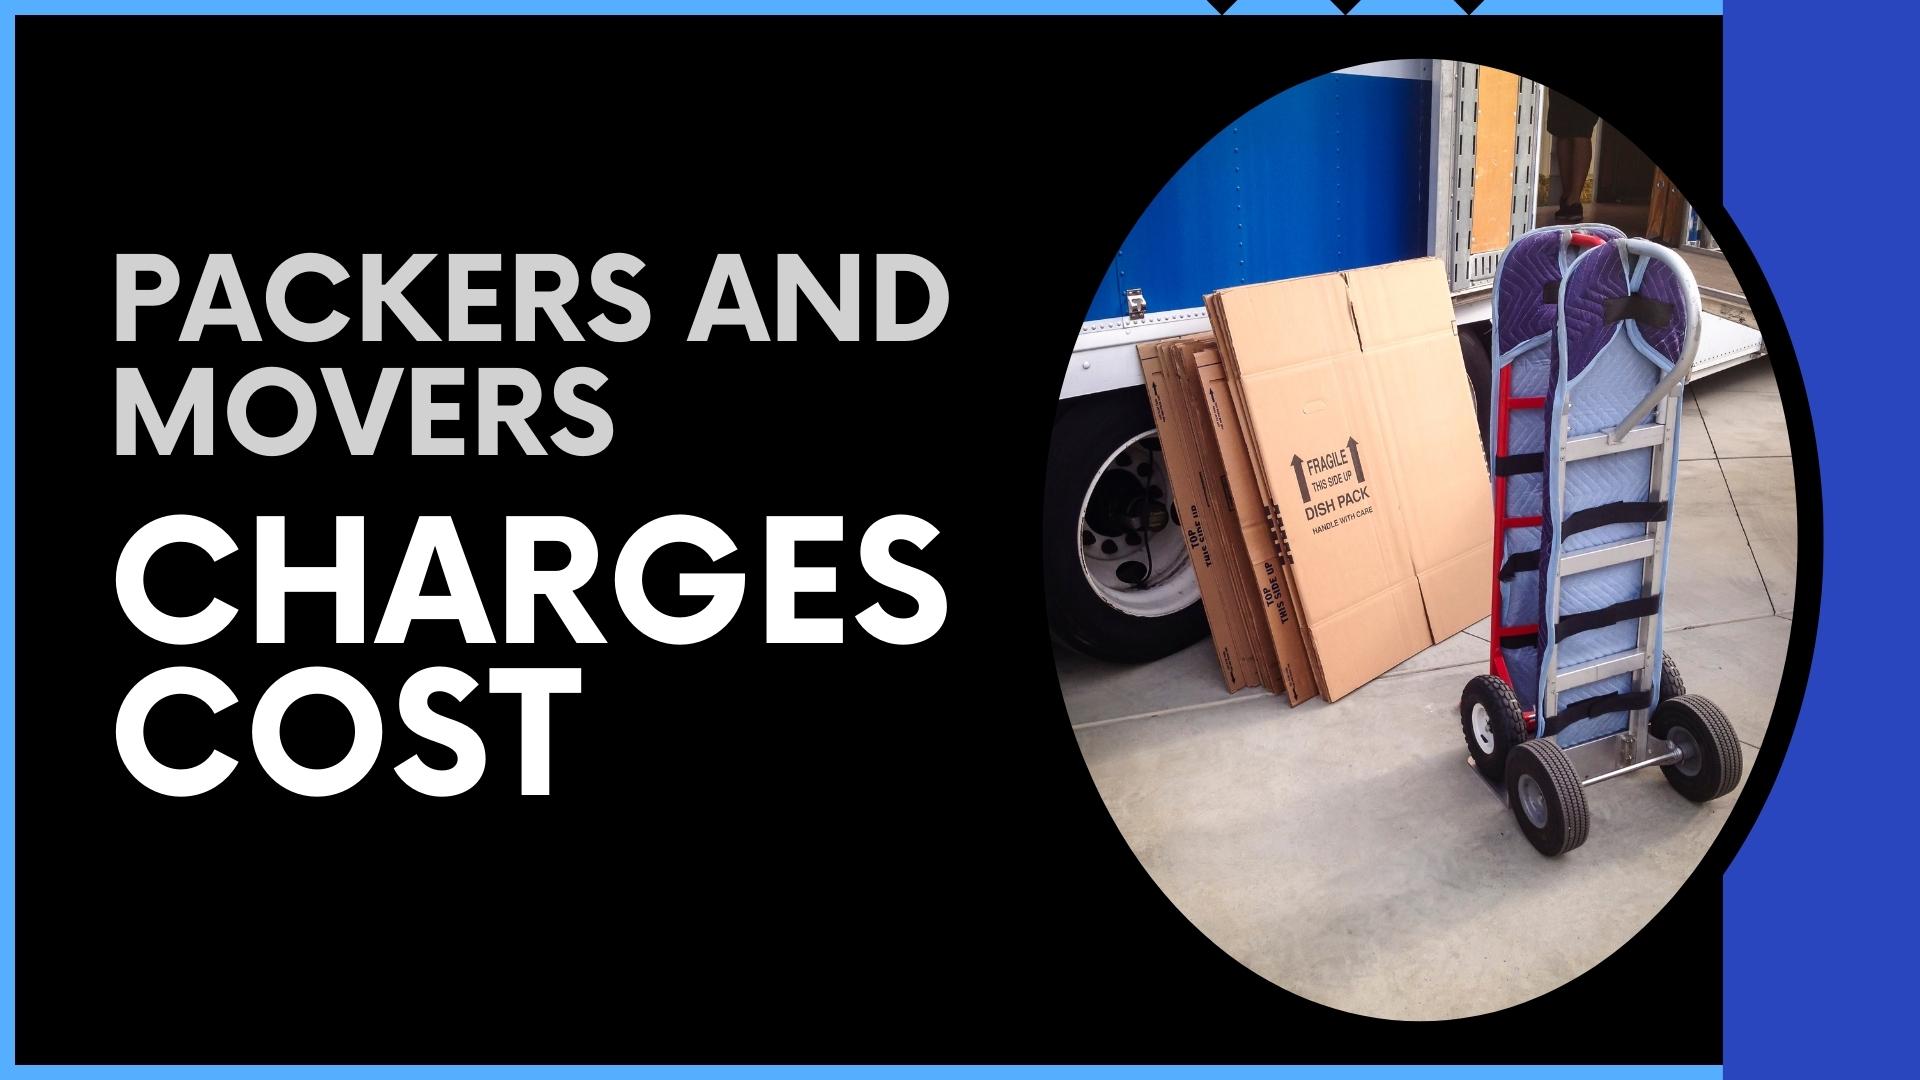 Packers and Movers offers competitive movers and packers Jabalpur rates and excellent services